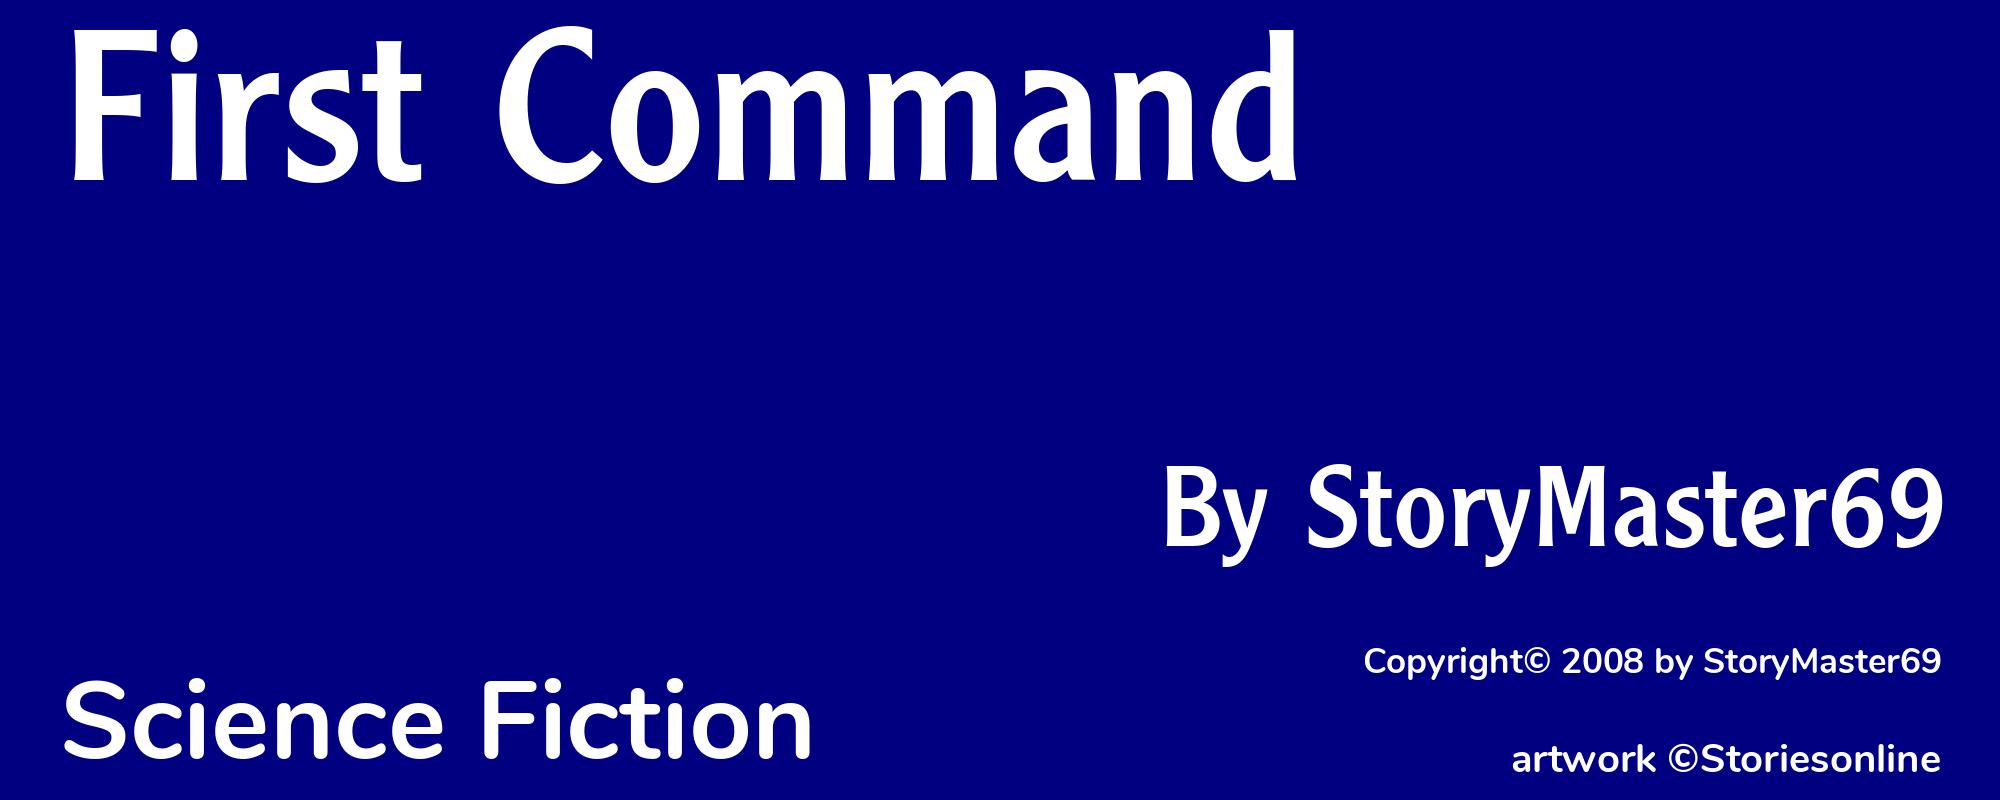 First Command - Cover